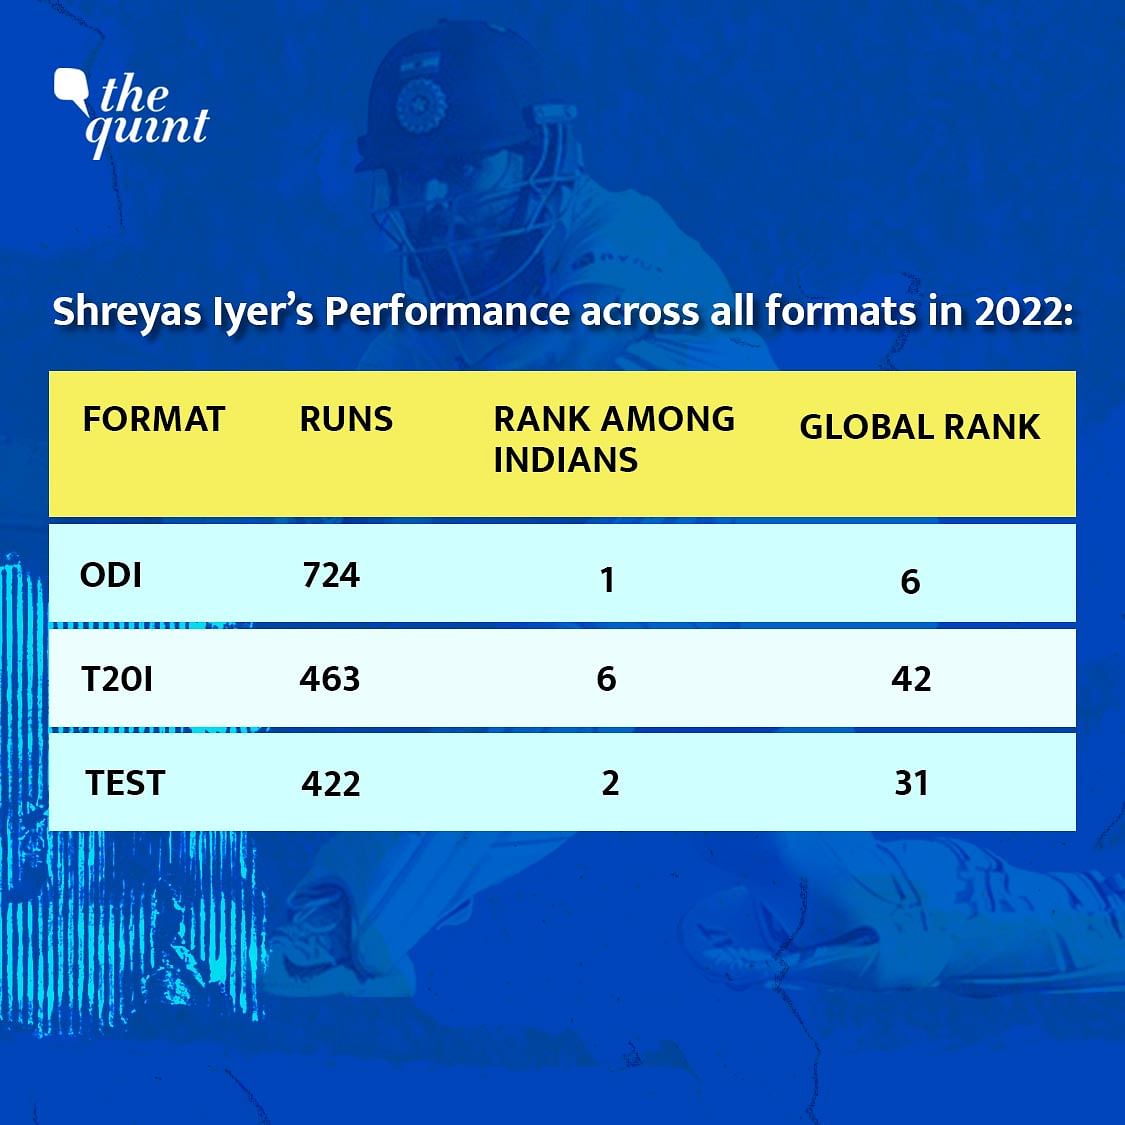 Shreyas Iyer scored the most runs for the Indian men's cricket team in 2022.